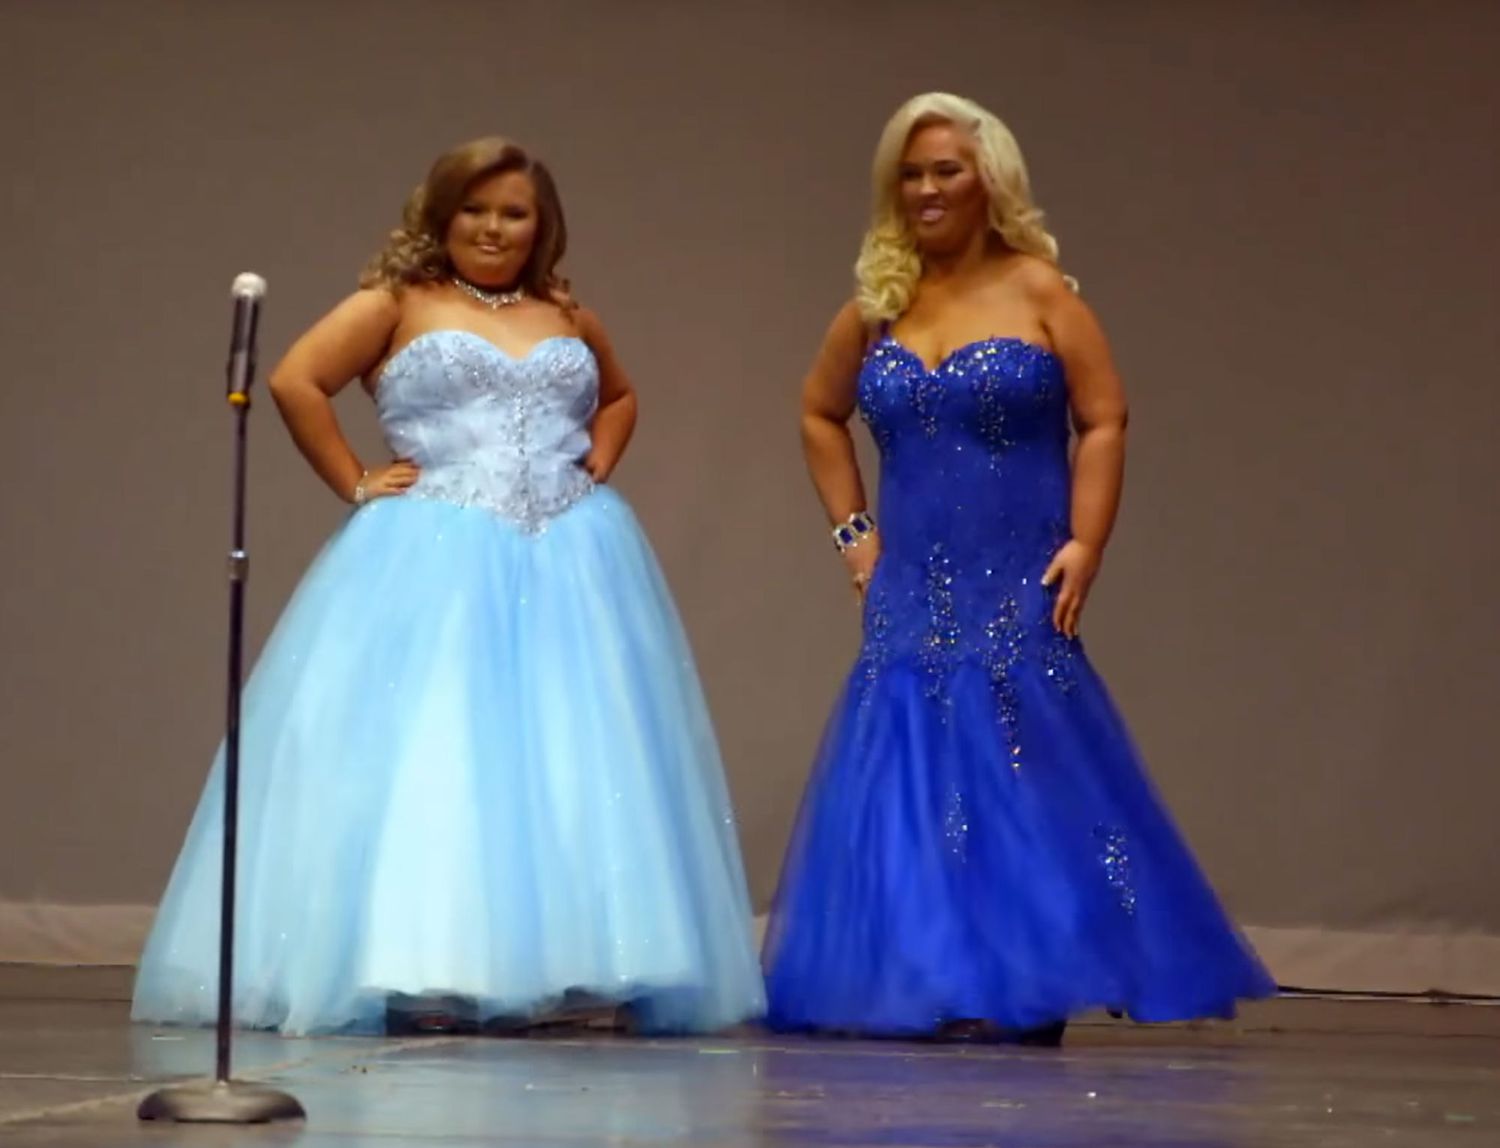 Mama June And Honey Boo Boo Compete In First Mother Daughter Pageant